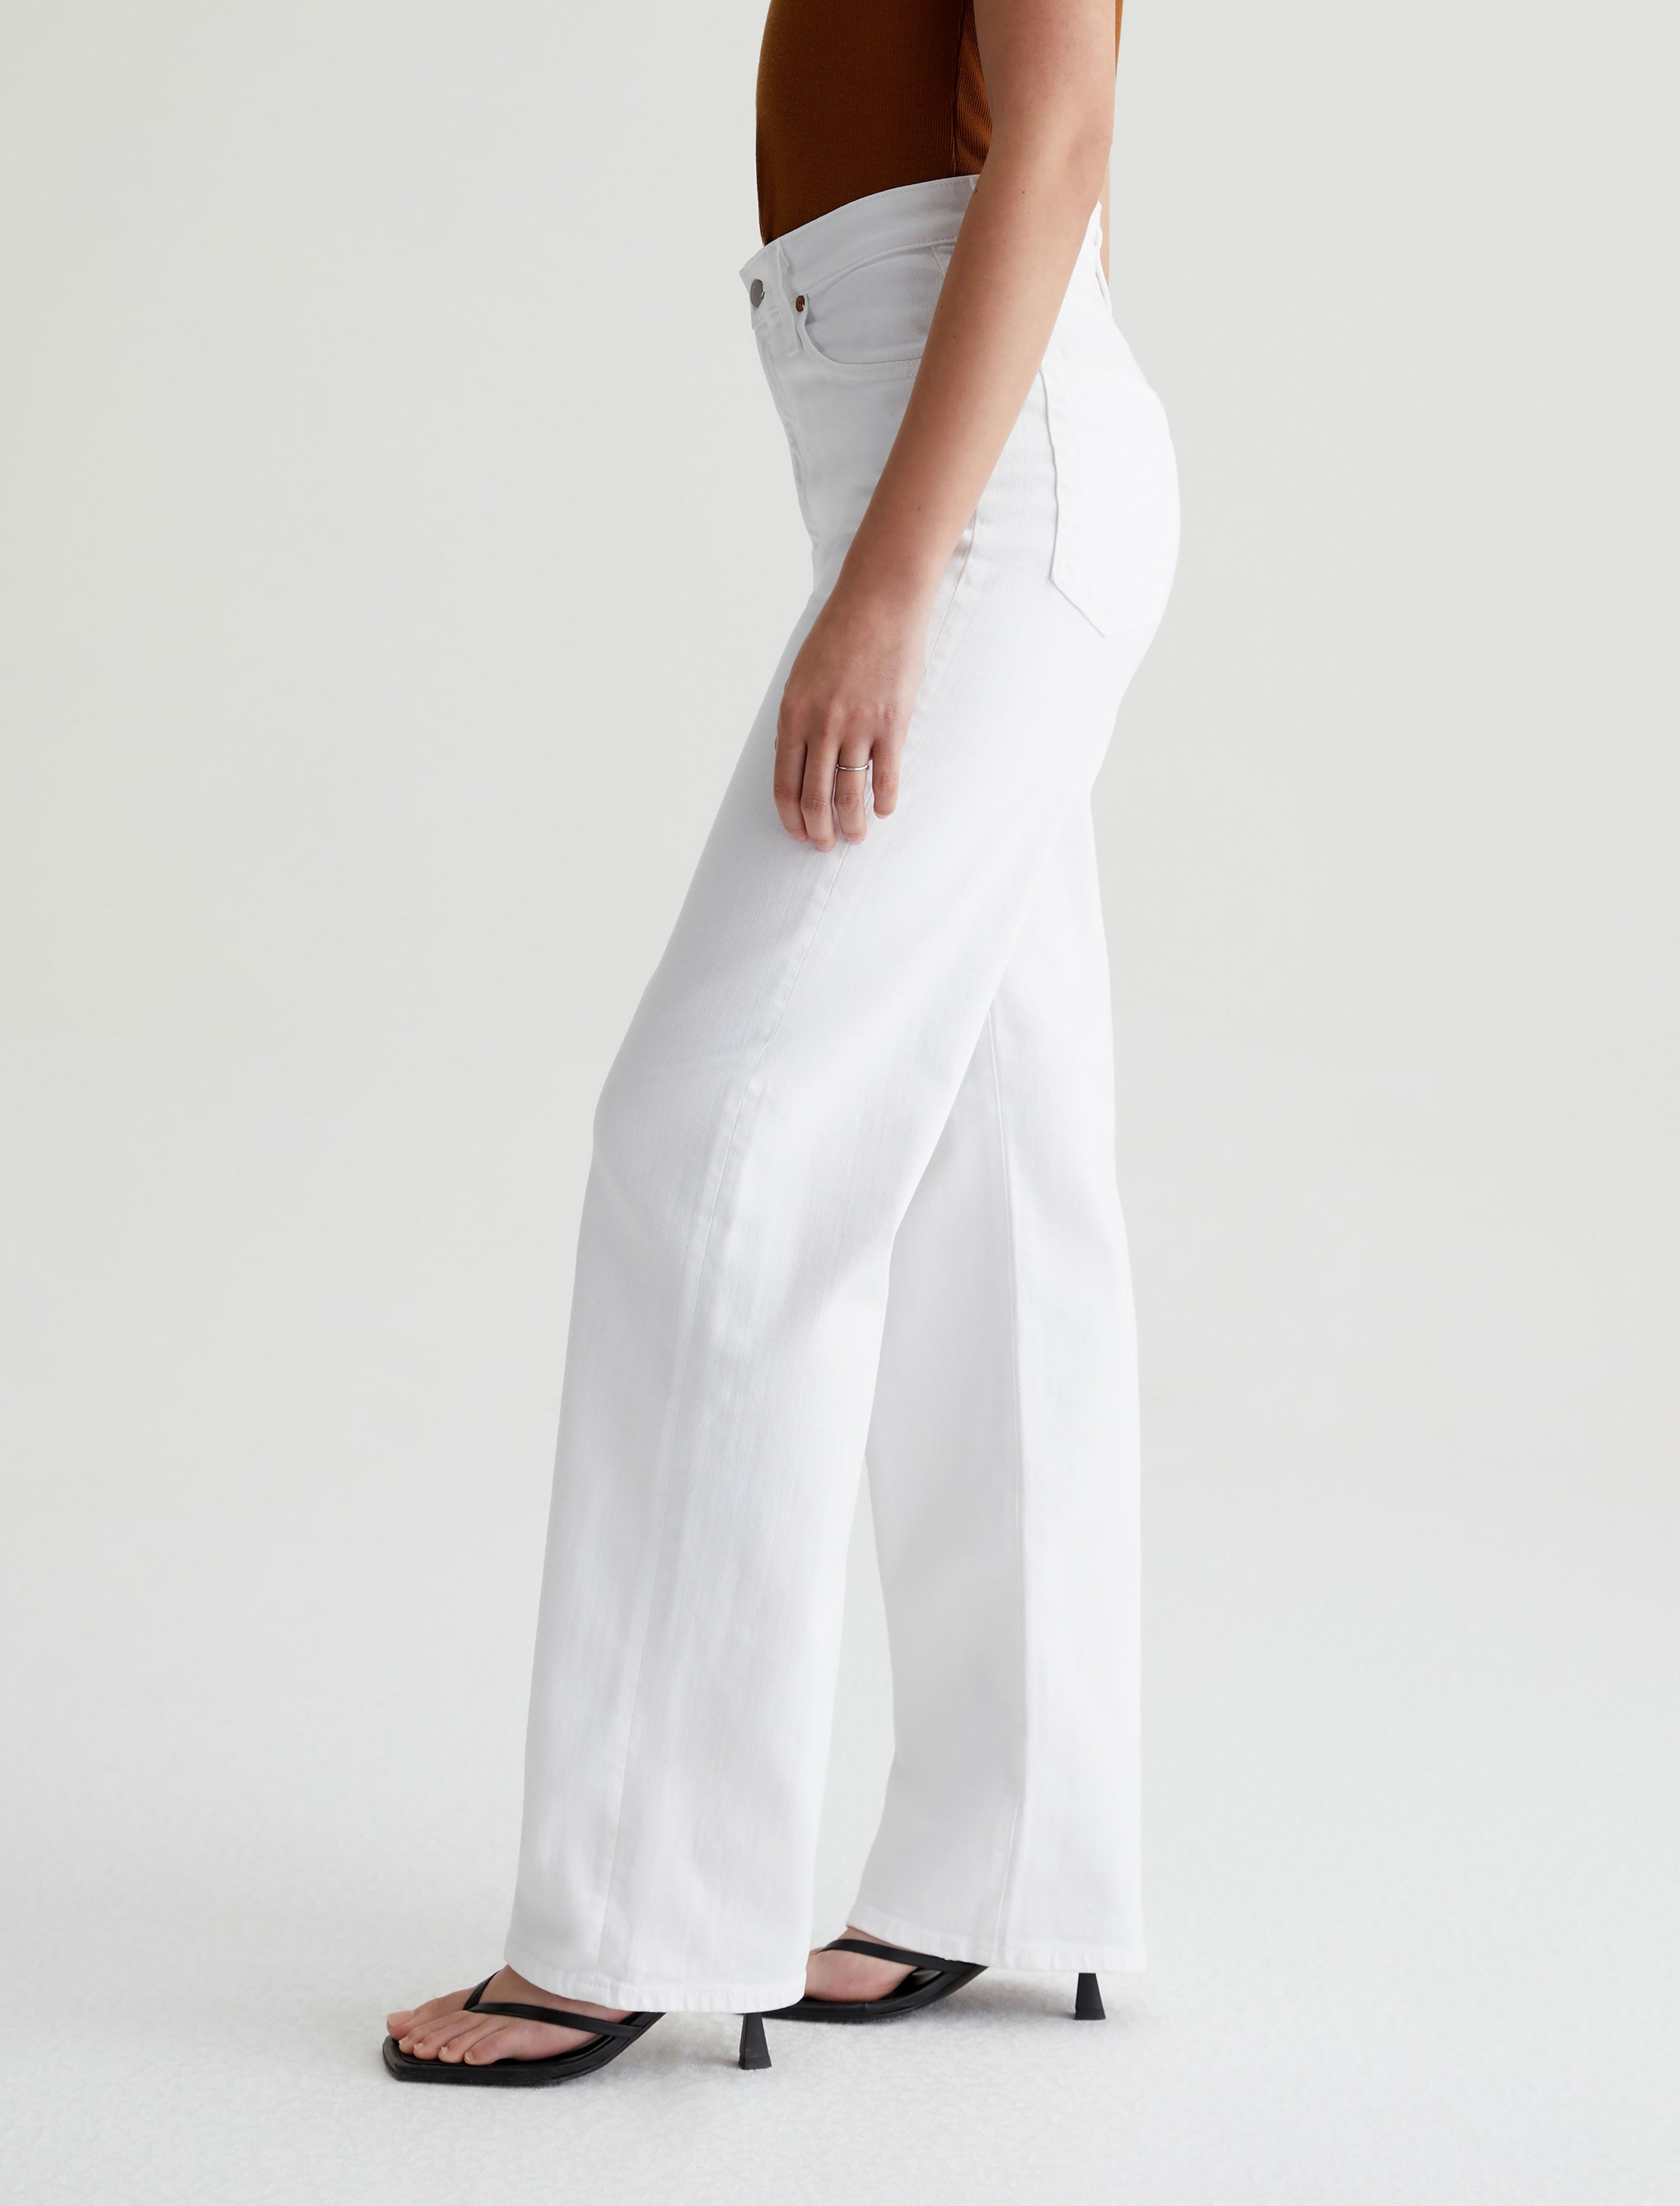 Buy WineRed Women White Trouser at Amazon.in